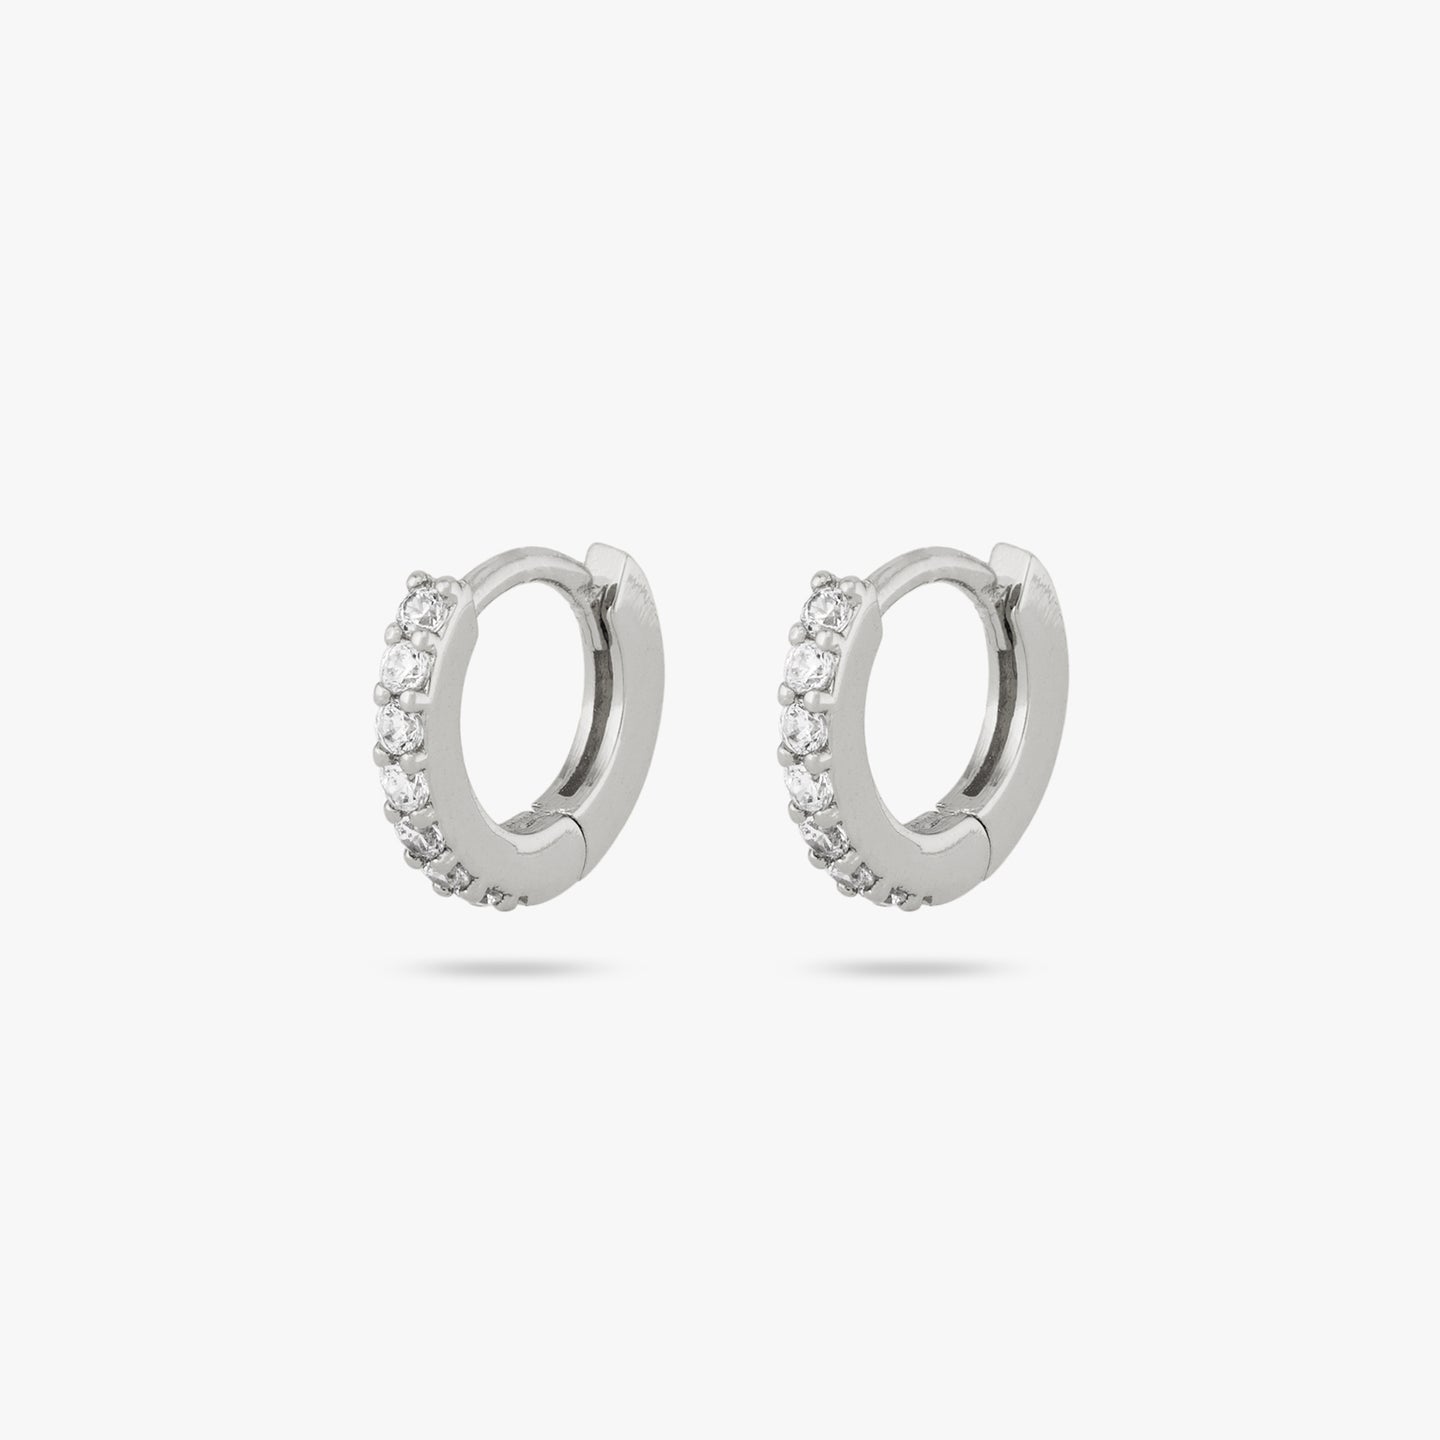 A pair of silver/clear micro pave huggies with a 6mm inner diameter [pair] color:null|silver/clear